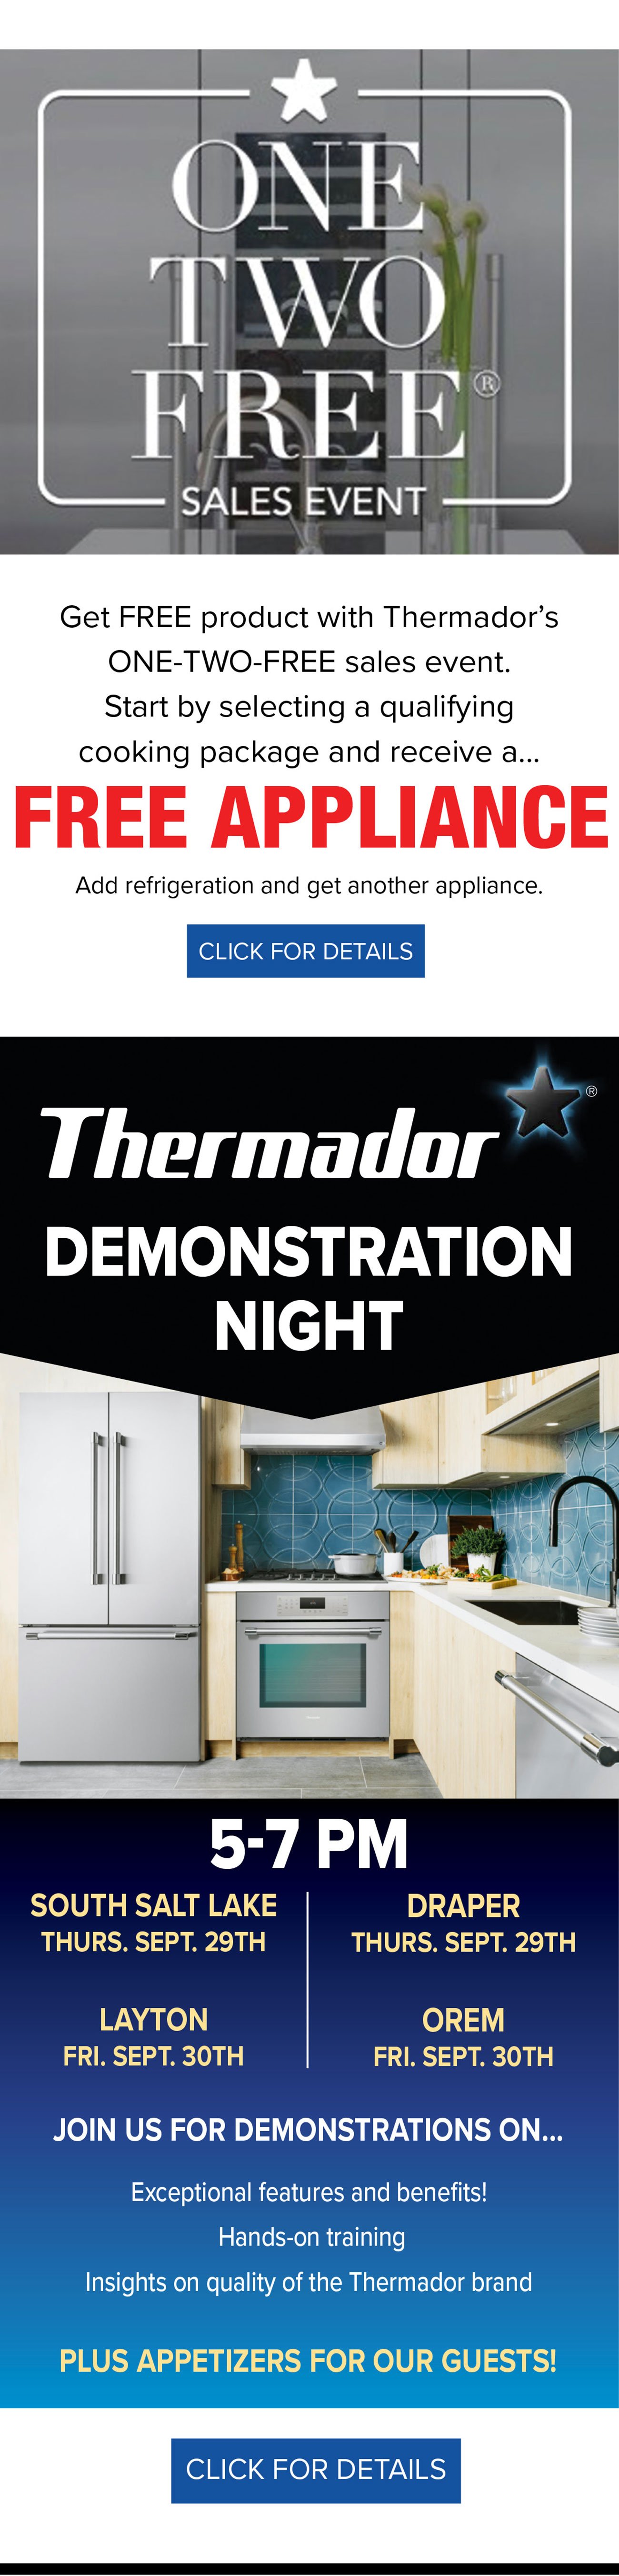  SALES EVENT Get FREE product with Thermadors ONE-TWO-FREE sales event. Start by selecting a qualifying cooking package and receive a... FREE APPLIANCE Add refrigeration and get another appliance. CLICK FOR DETAILS - - Thermador DEMONSTRATION NIGHT SOUTH SALT LAKE DRAPER THURS. SEPT. 29TH THURS. SEPT. 29TH LAYTON OREM FRI. SEPT. 30TH FRI. SEPT. 30TH JOIN US FOR DEMONSTRATIONS ON... Exceptional features and benefits! Hands-on training Insights on quality of the Thermador brand PLUS APPETIZERS FOR OUR GUESTS! CLICK FOR DETAILS 